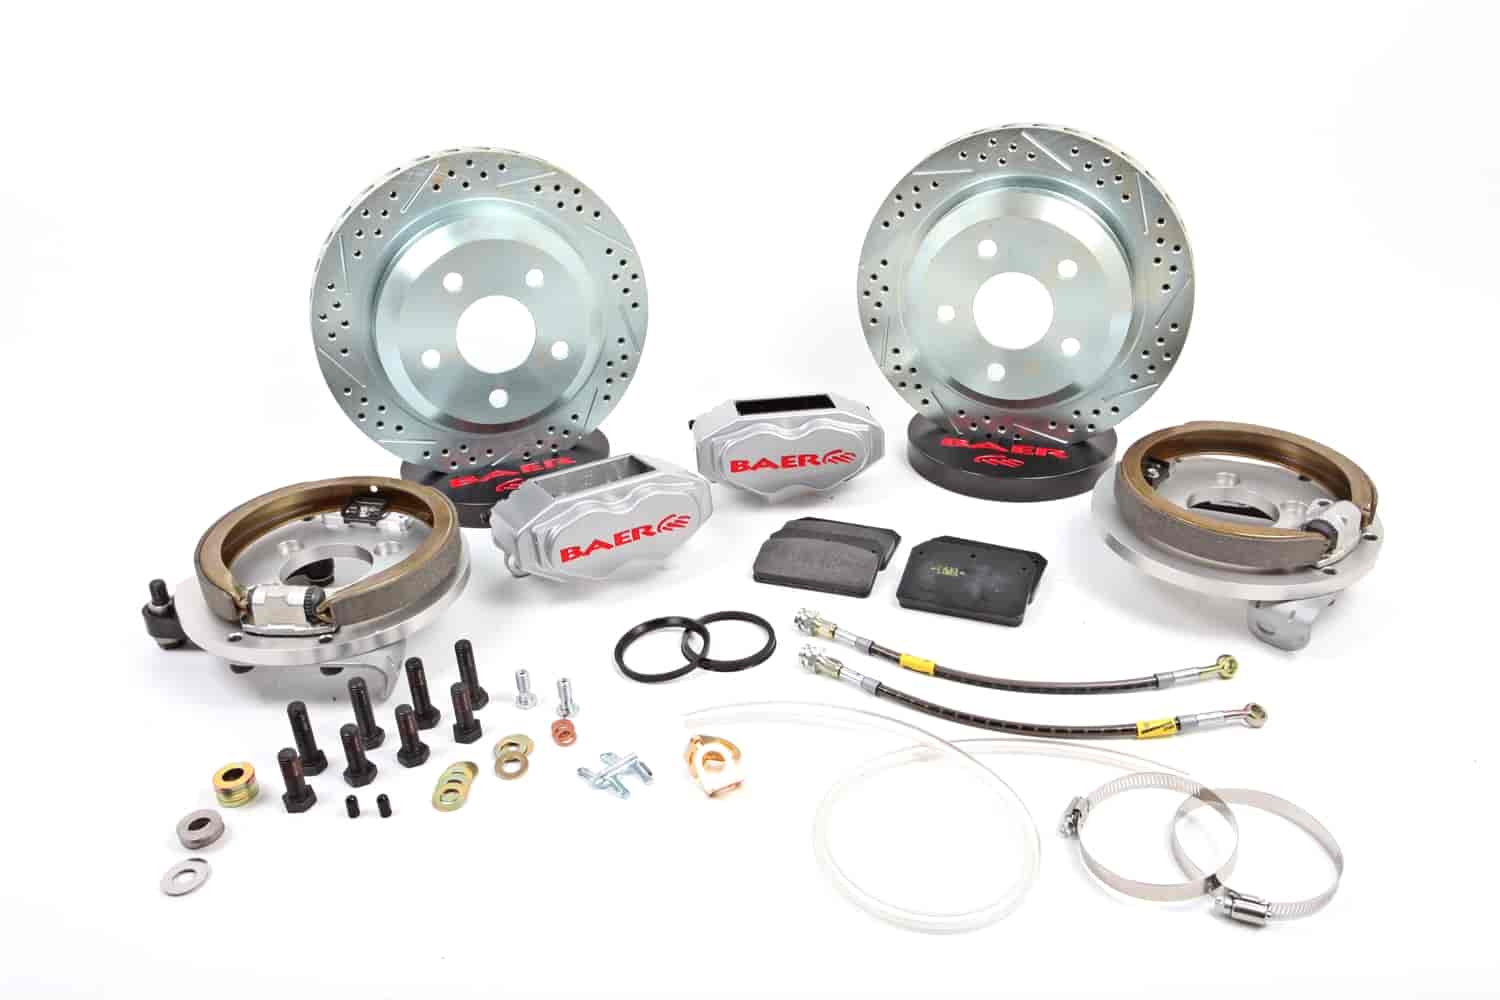 SS4 Rear Brake Kit 8.8" Ford With SN95 Suspension